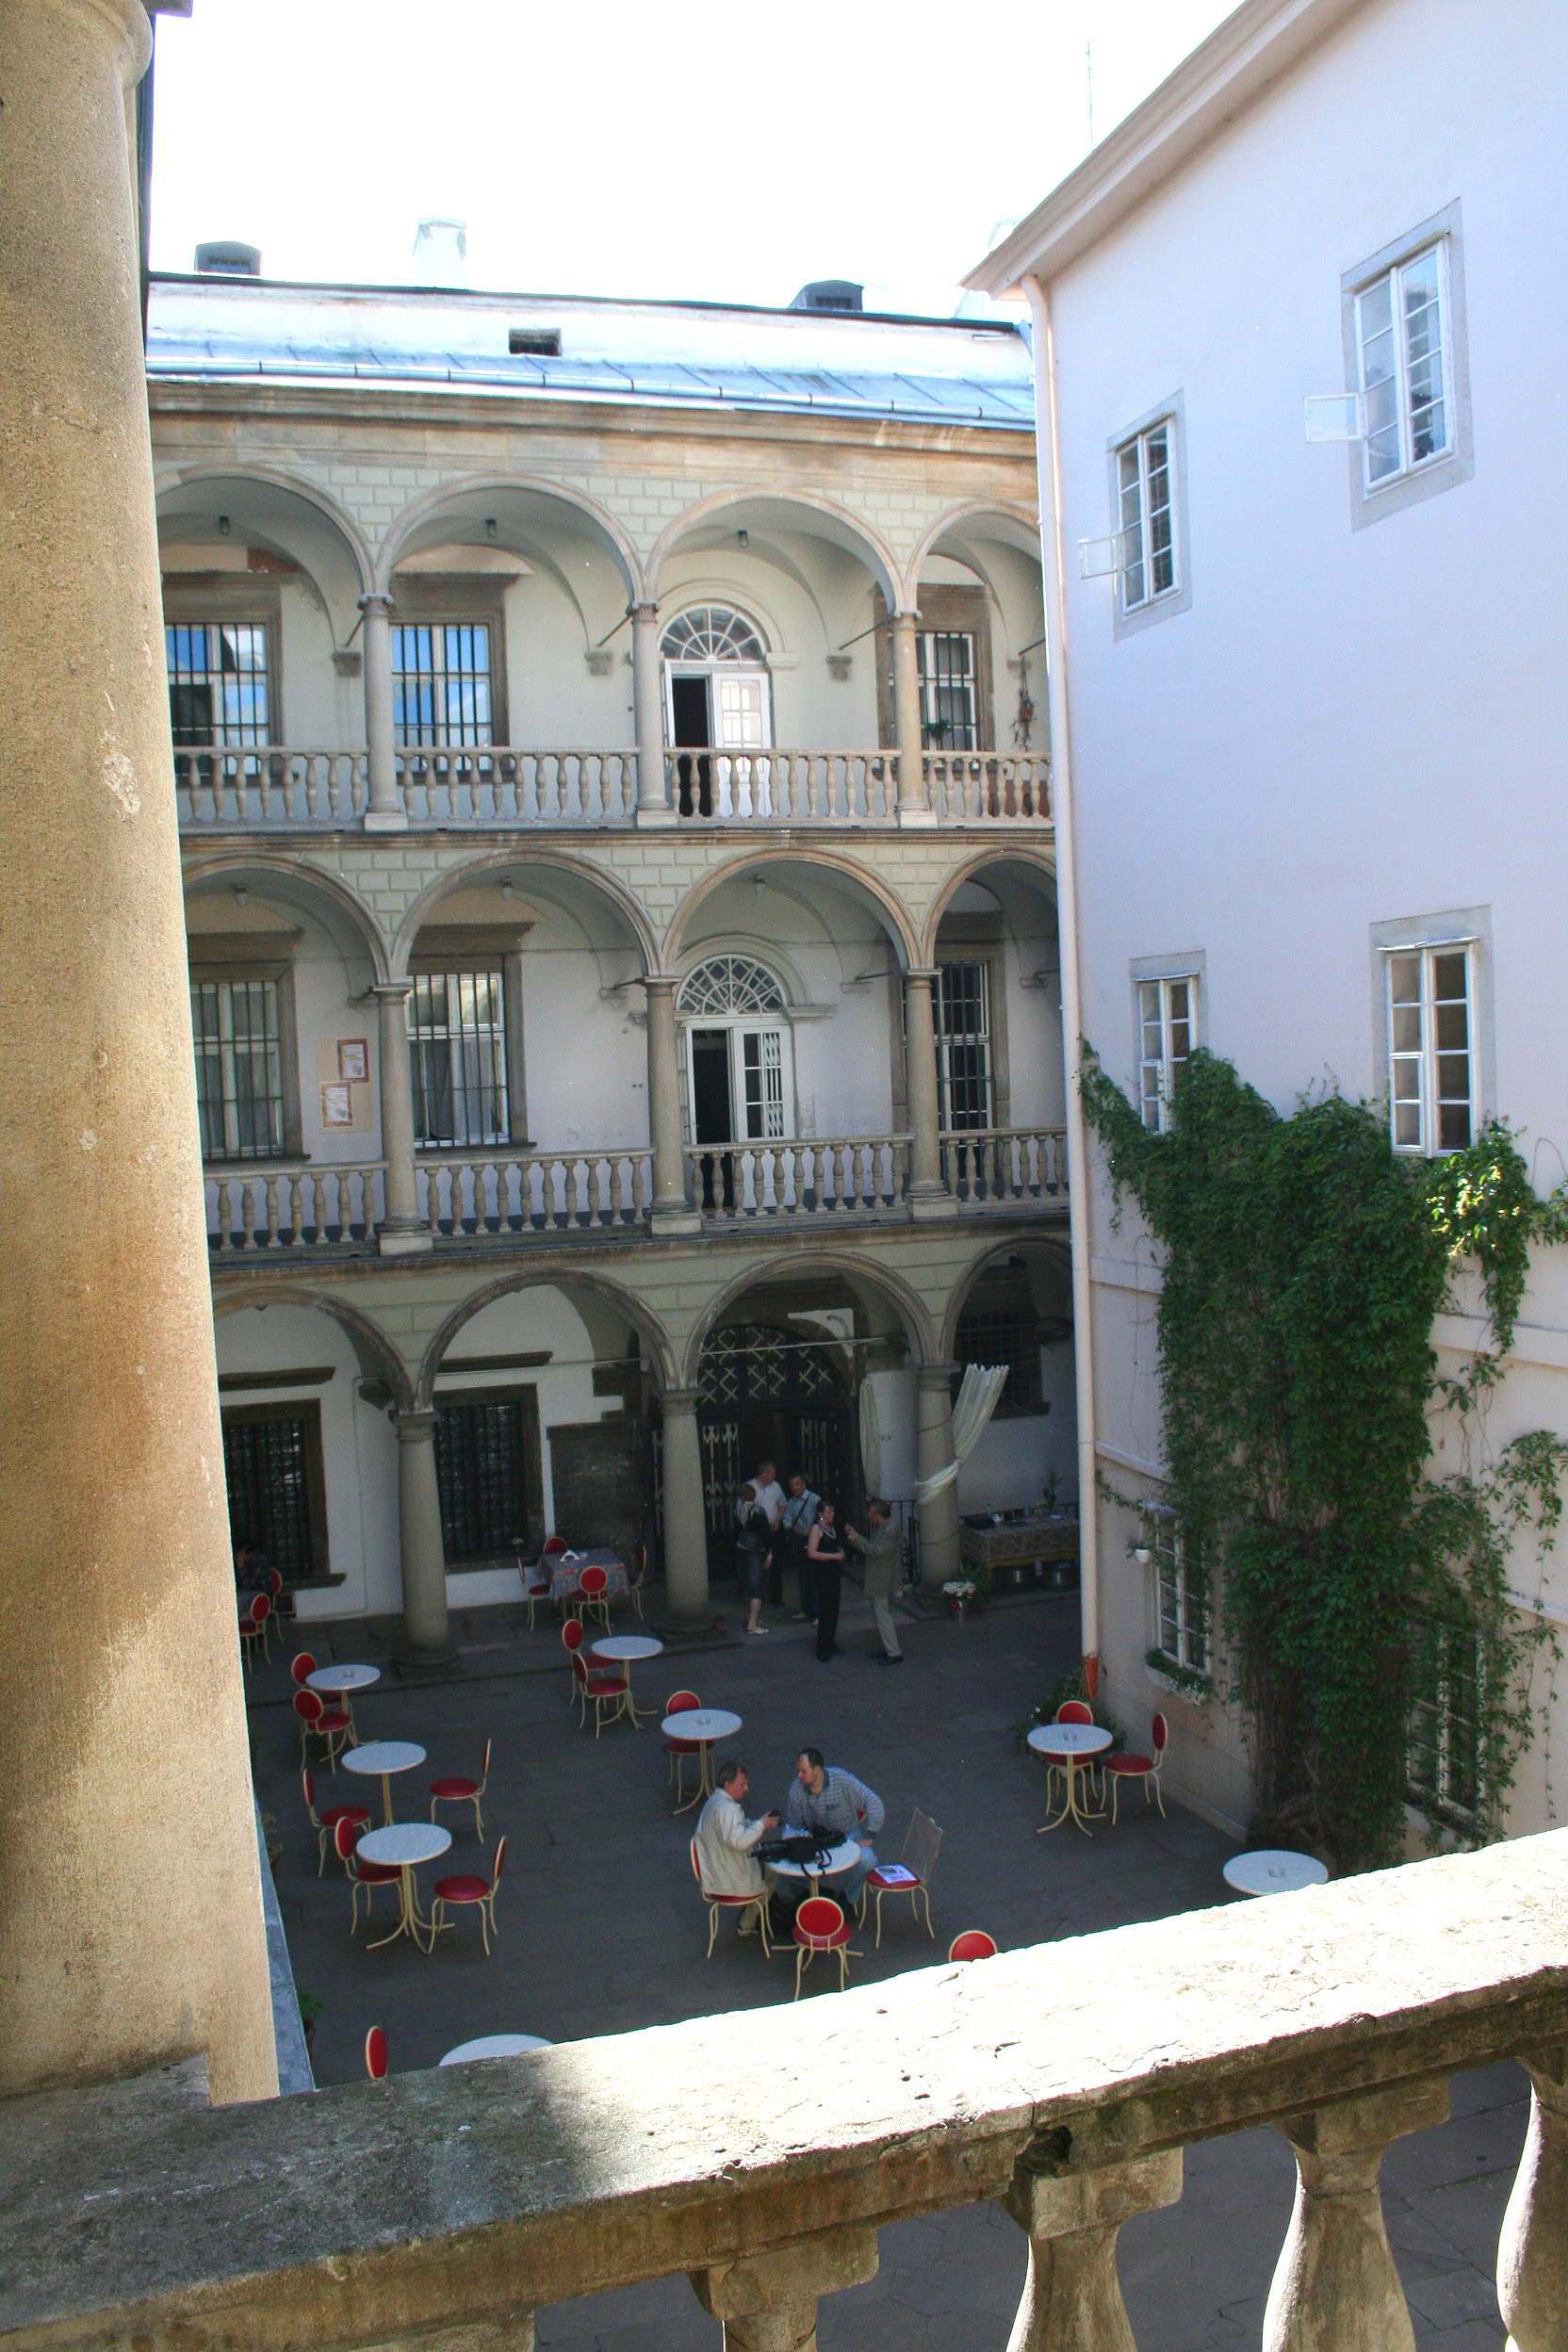 Another view of the Italian Courtyard.